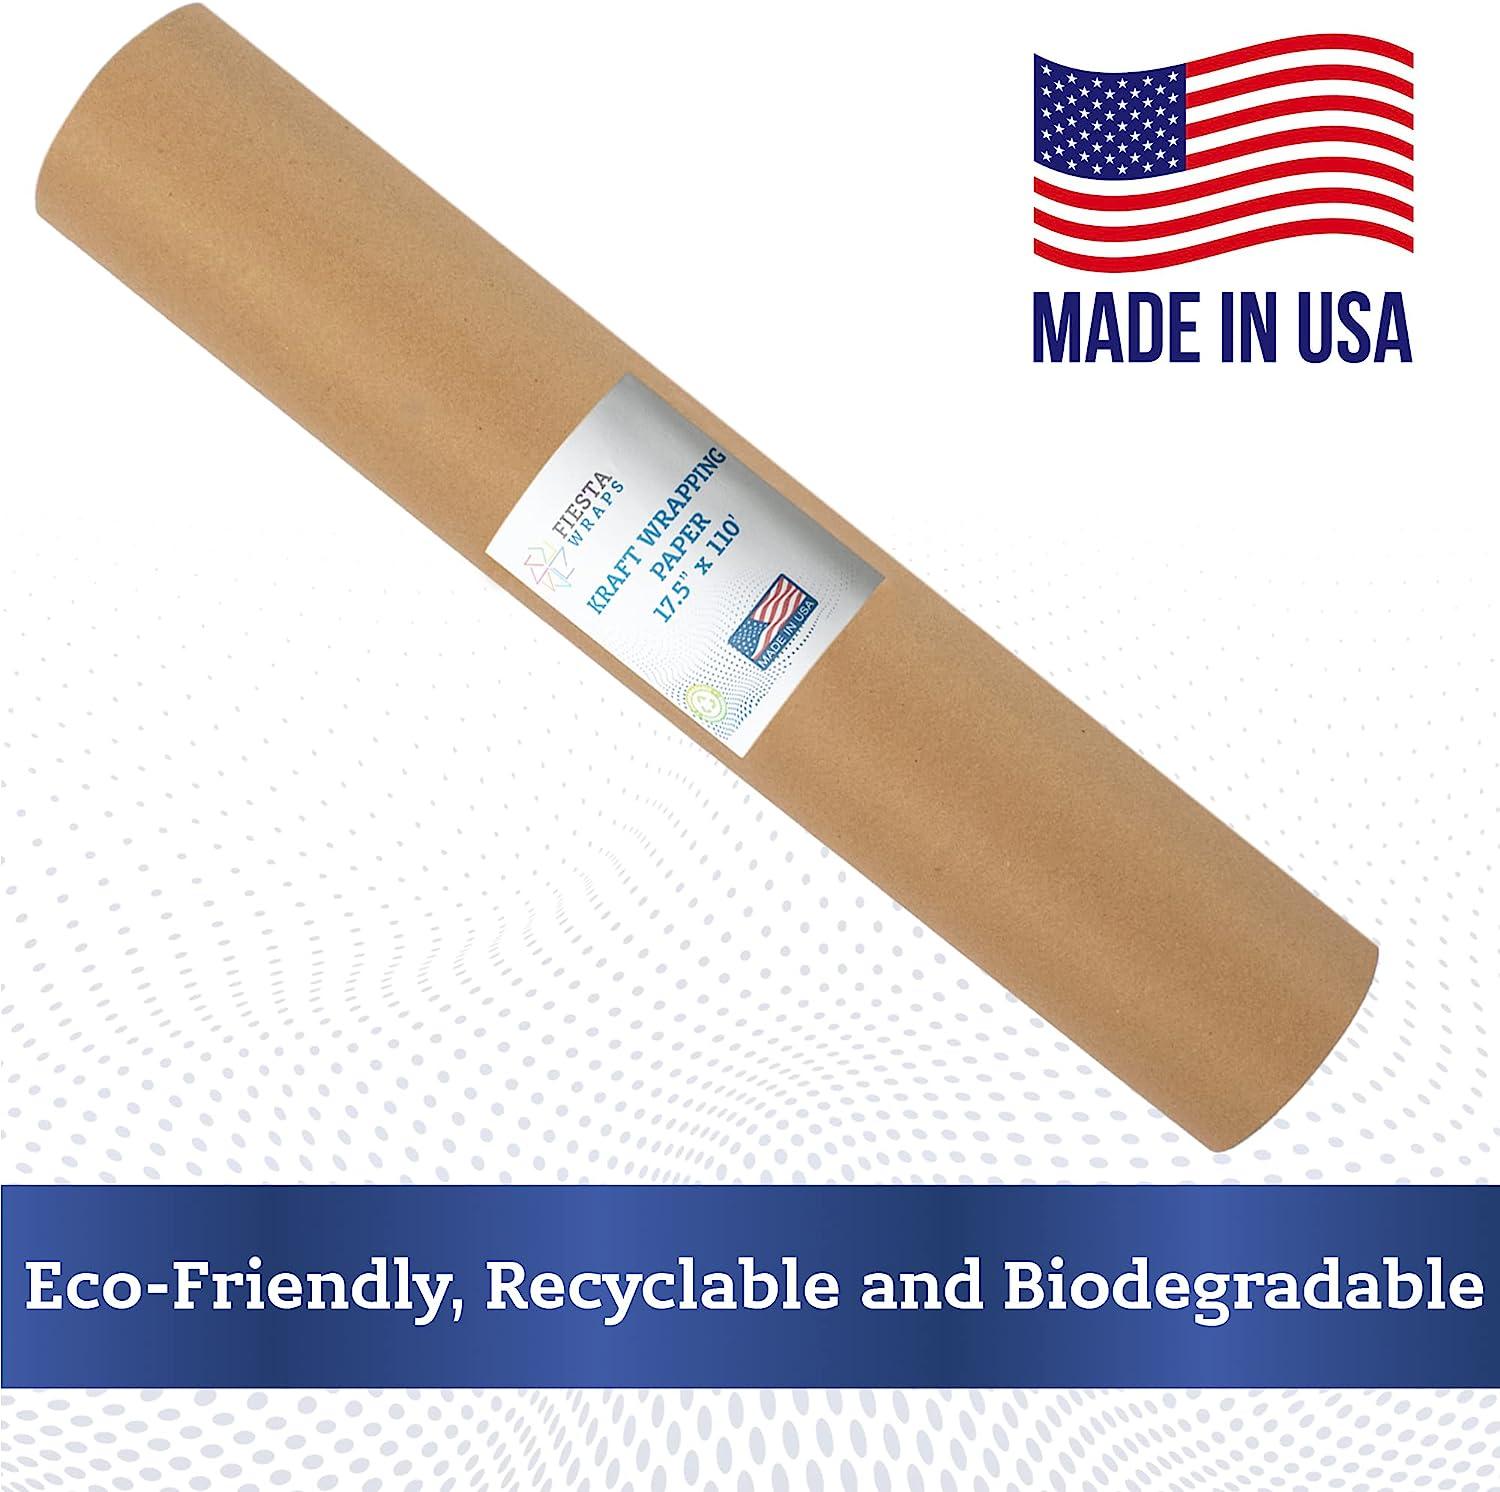 Brown Kraft Paper Roll 17.5 in x 1320 in (110 ft) Made in The USA - Brown  Paper Roll - Brown Wrapping Paper Roll - Brown Craft Paper Roll - Roll of